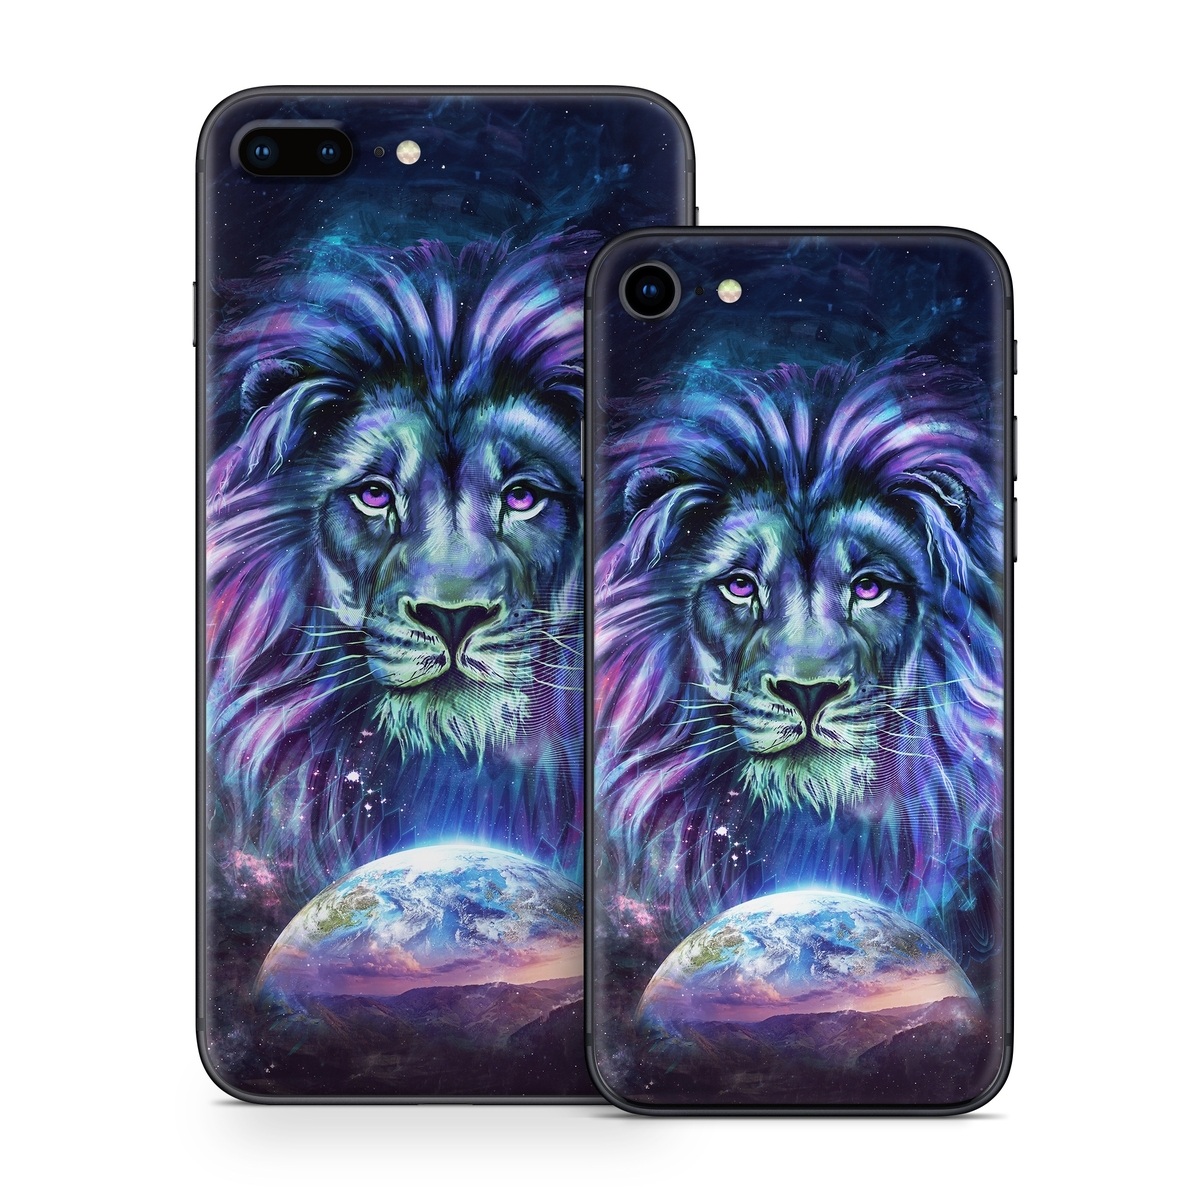 iPhone 8 Skin design of Lion, Felidae, Purple, Wildlife, Big cats, Illustration, Darkness, Space, Painting, Art with purple, blue, green, black, white, red colors